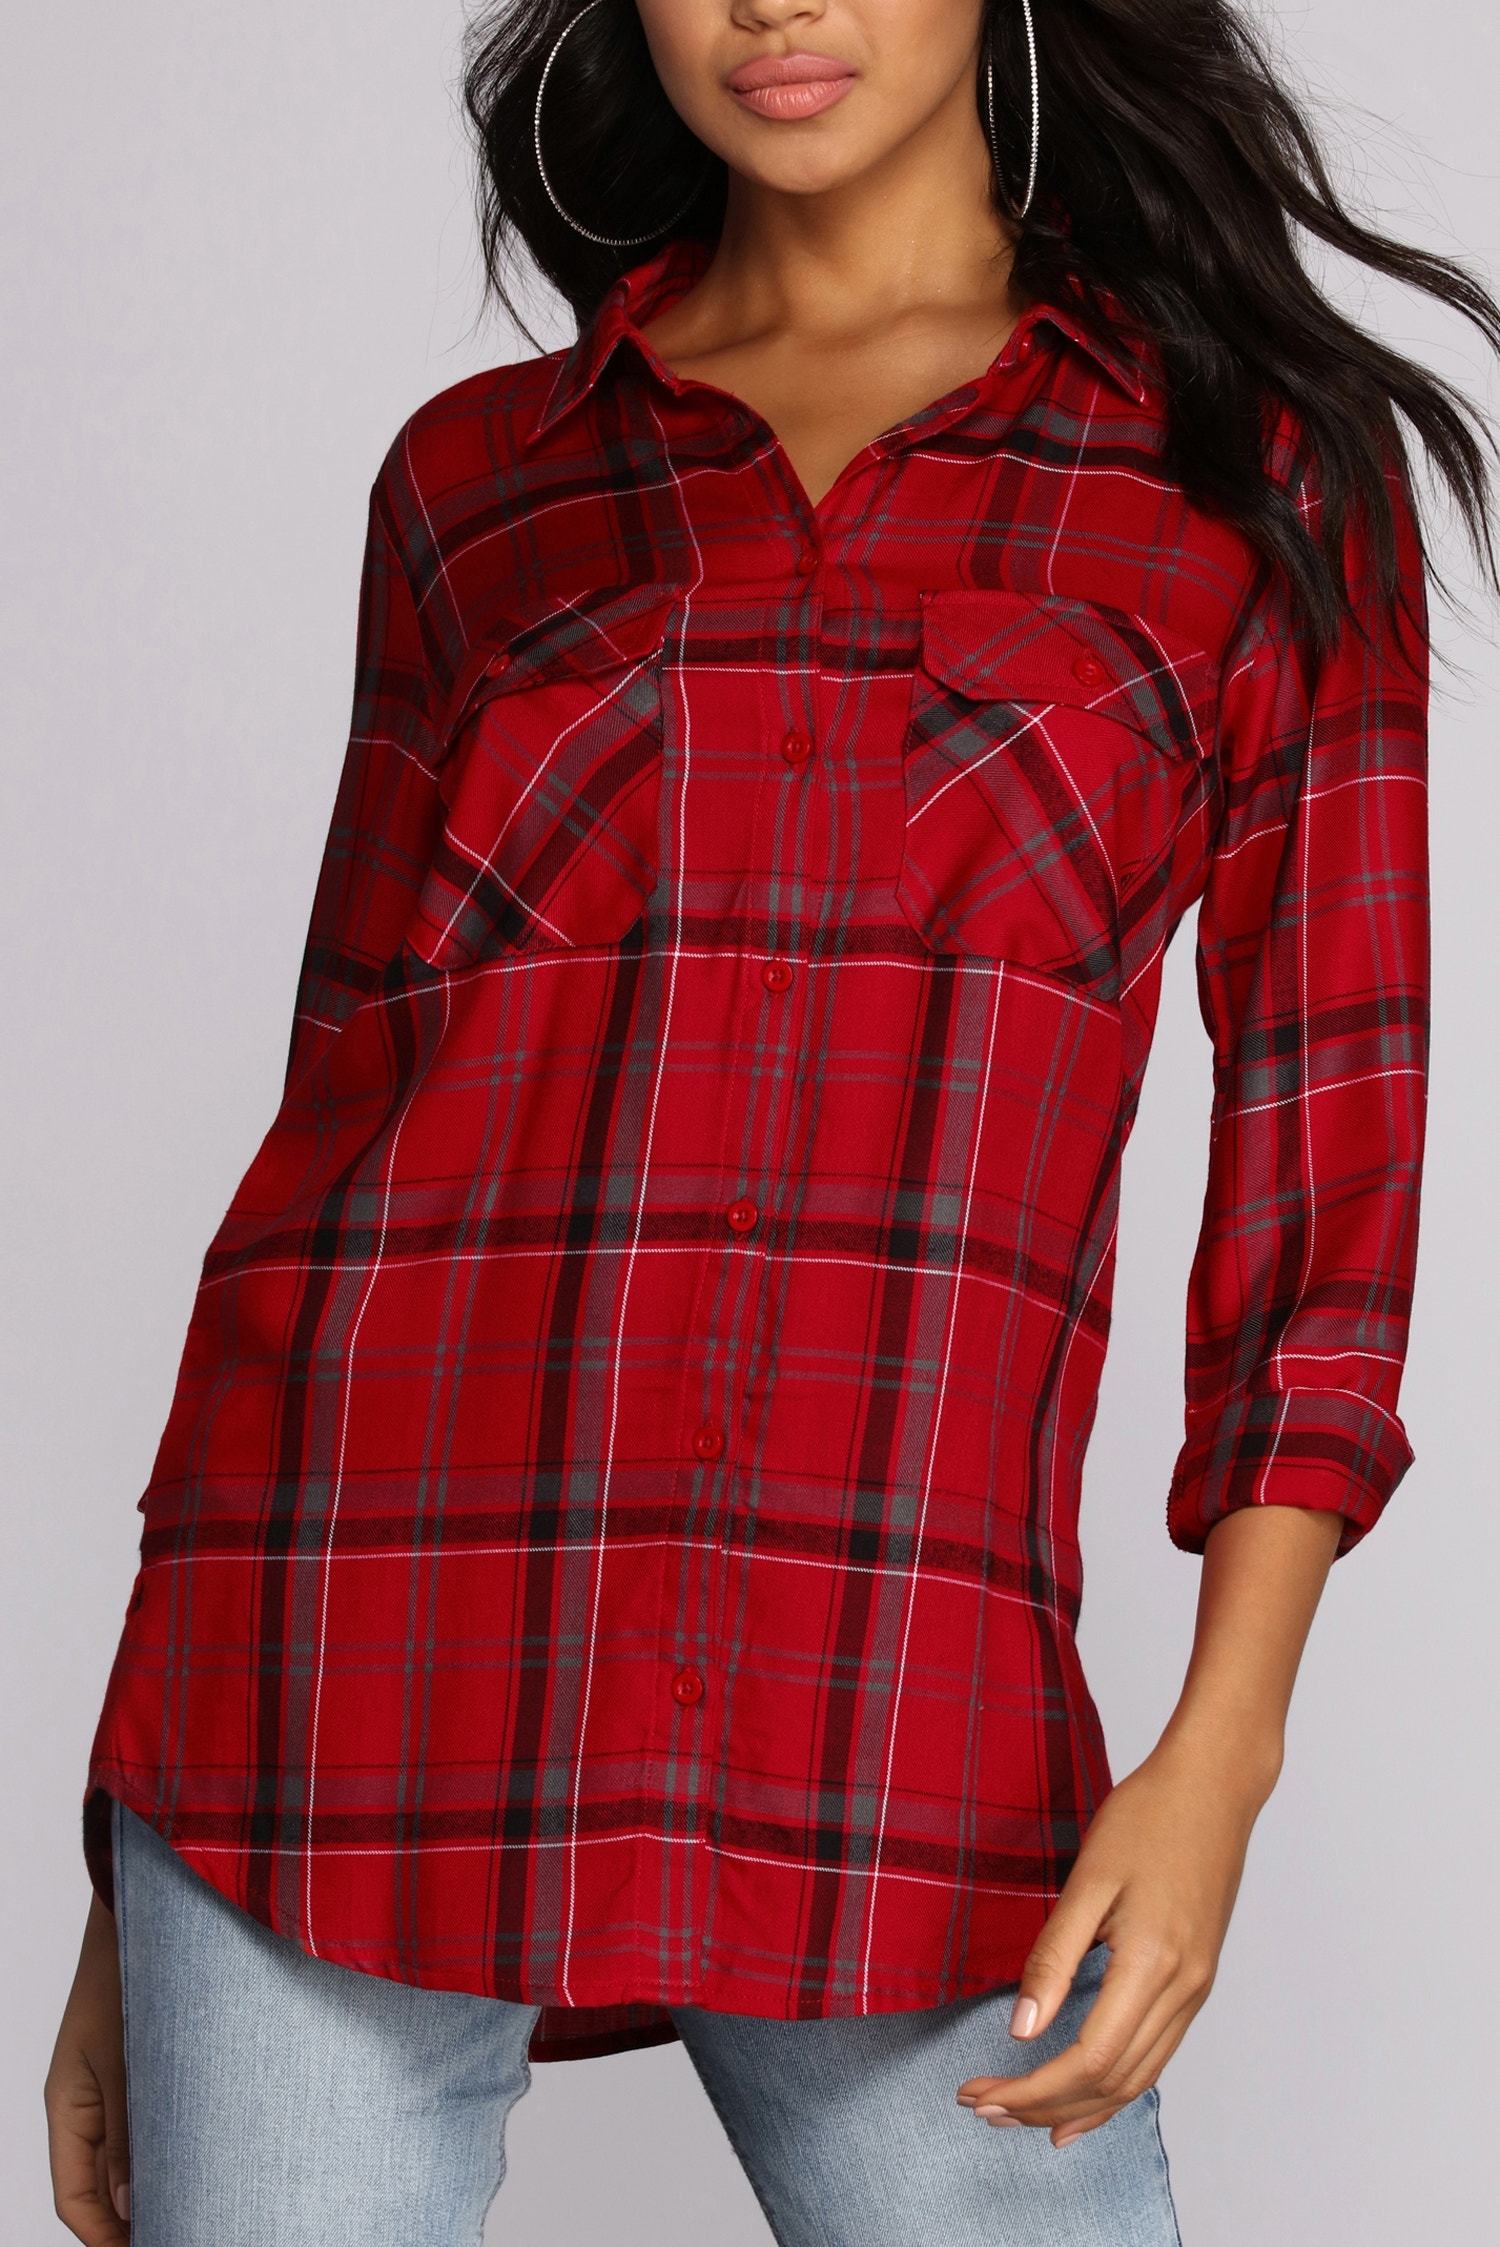 Perfectly Plaid Button Up Top - Lady Occasions